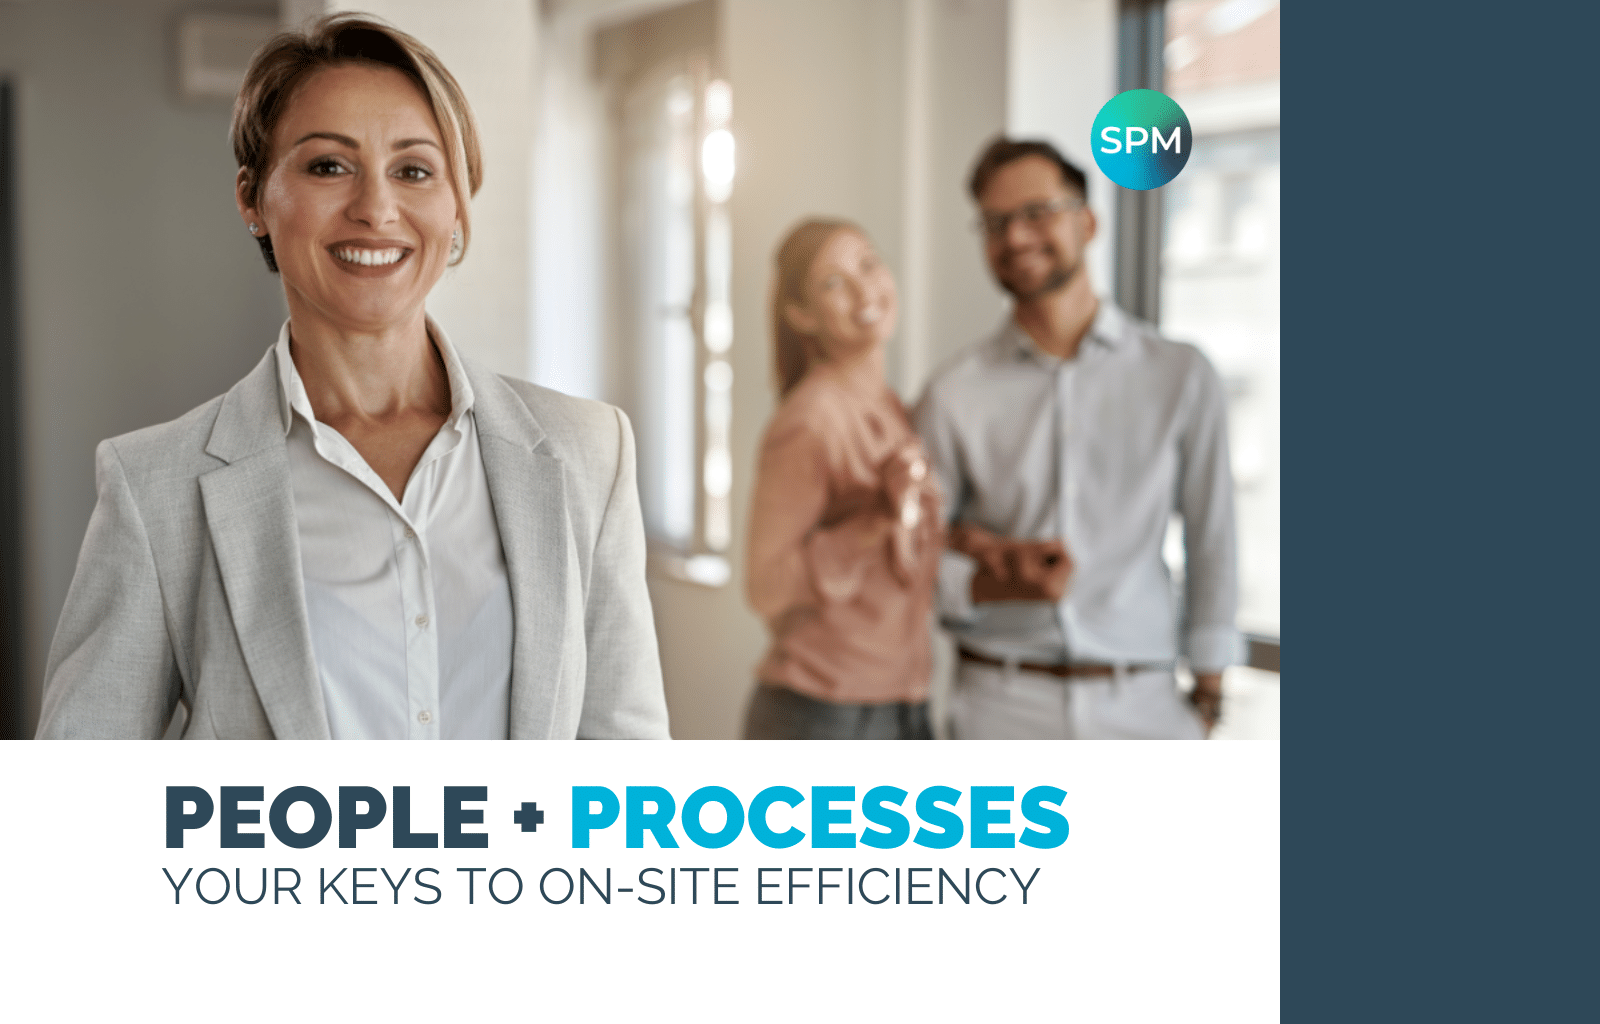 People + Processes Your keys to on-site efficiency